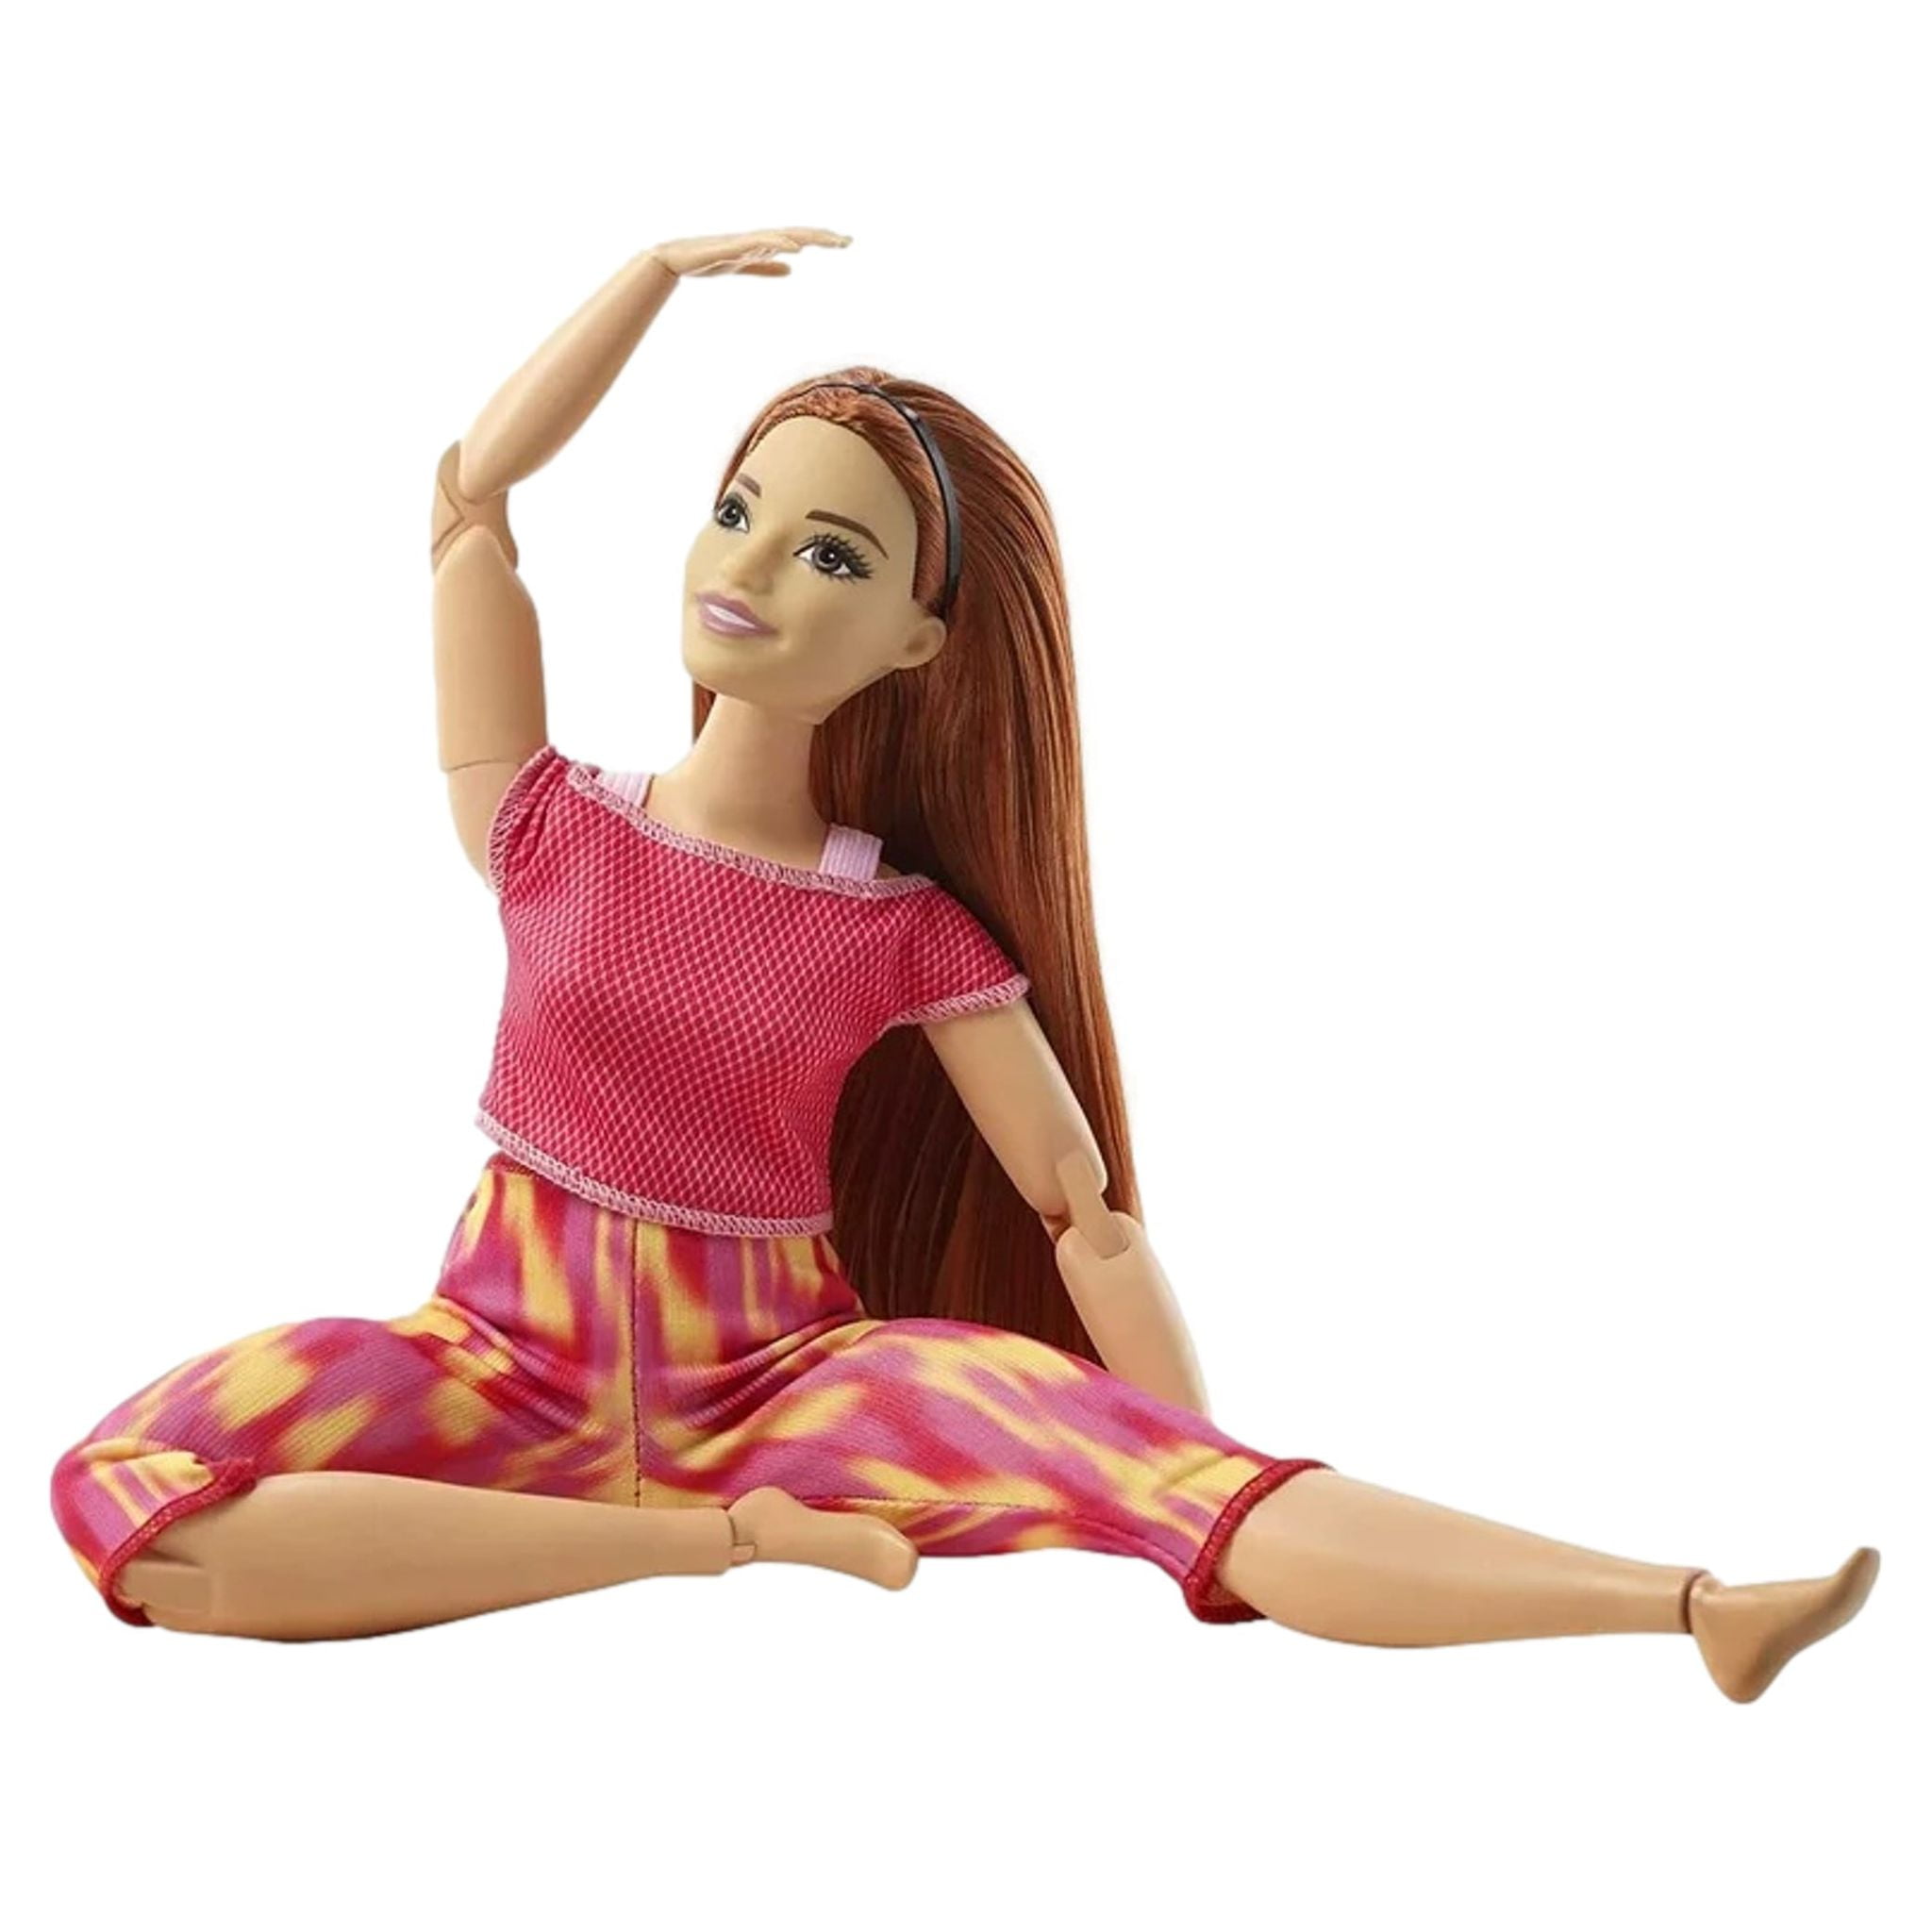 Barbie Made to Move Dolls with 22 Joints and Yoga Clothes, Floral, Pleach